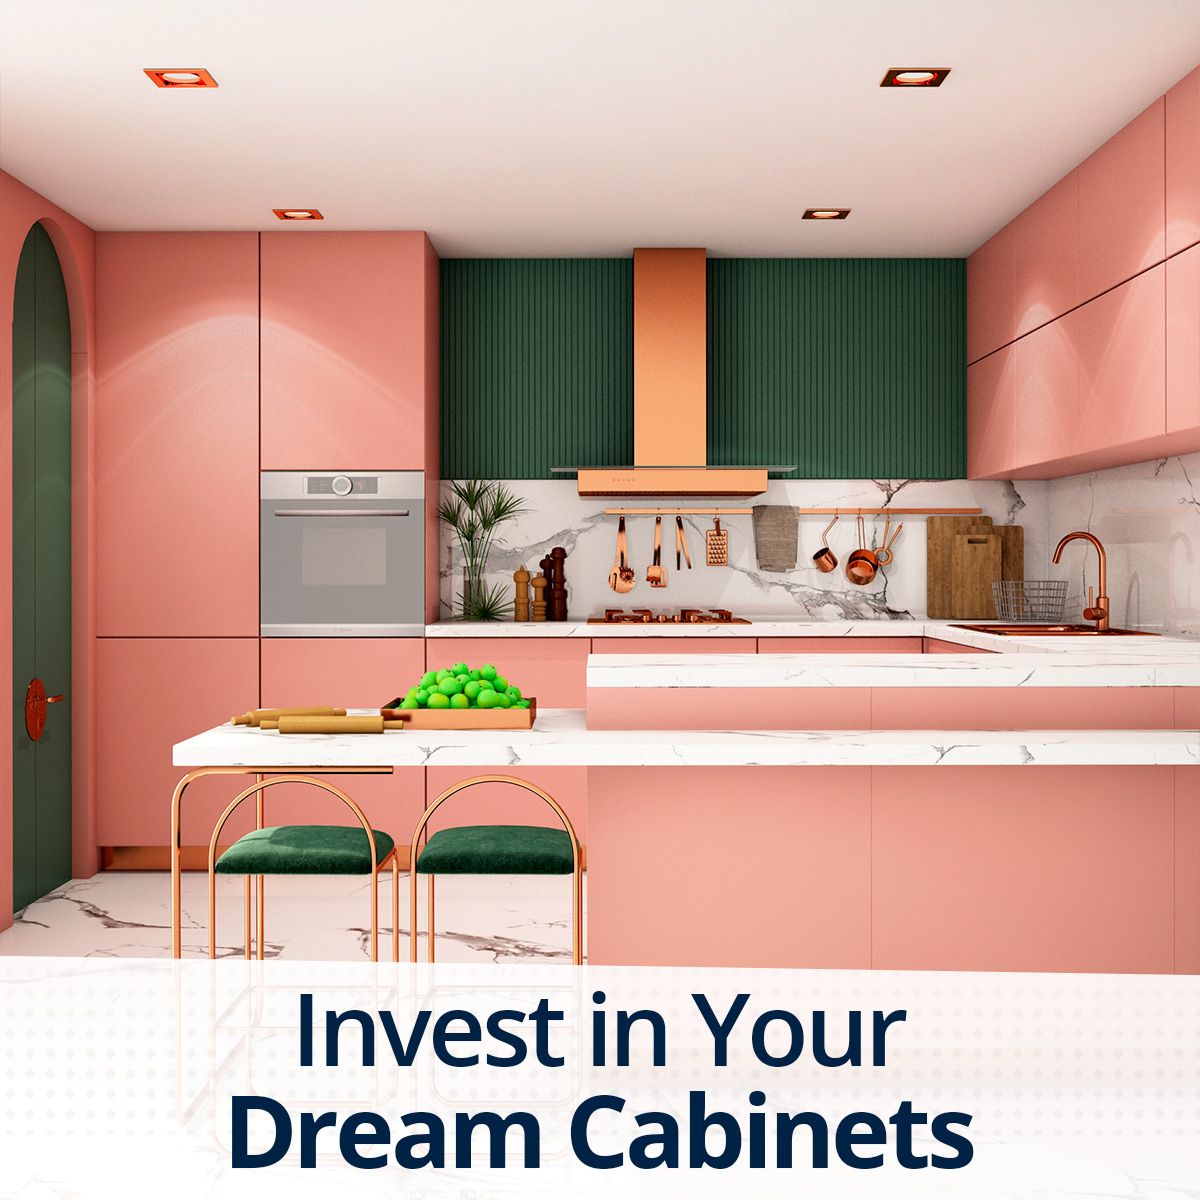 Invest in Your Dream Cabinets